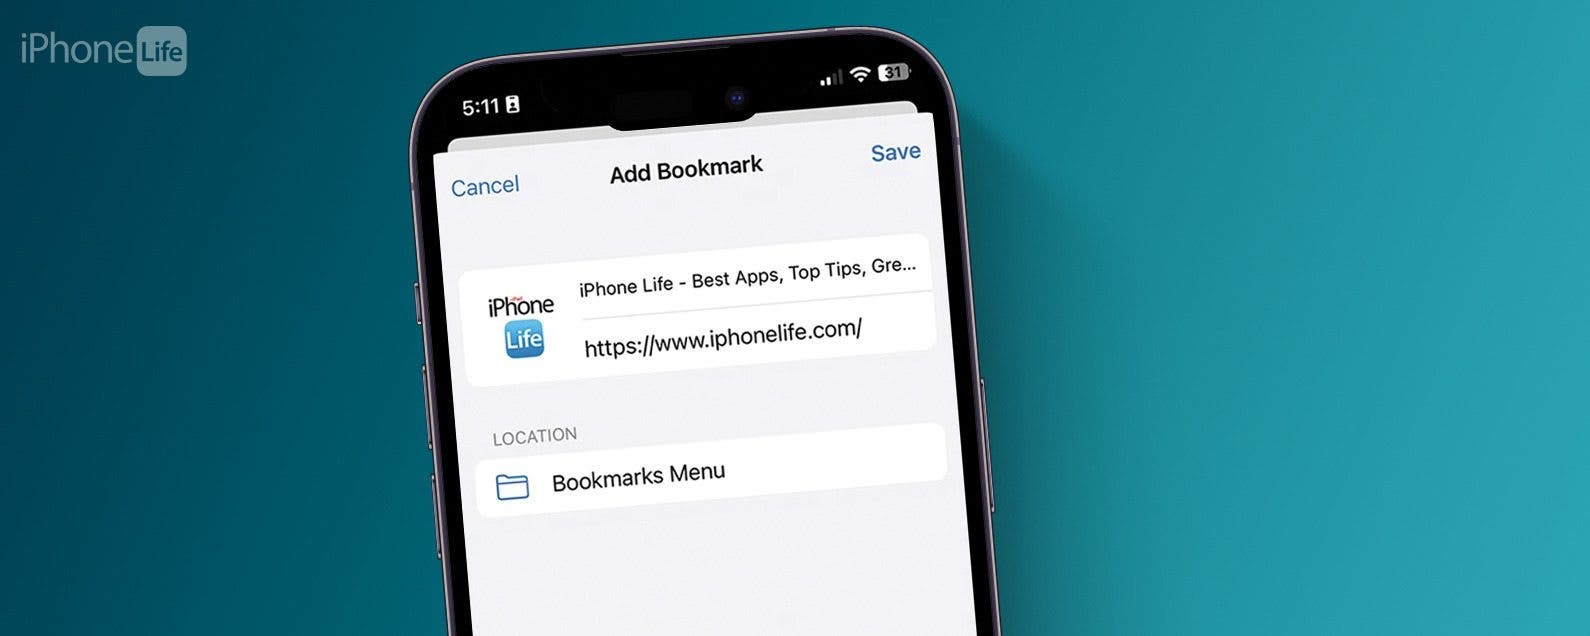 how to see safari bookmarks on iphone